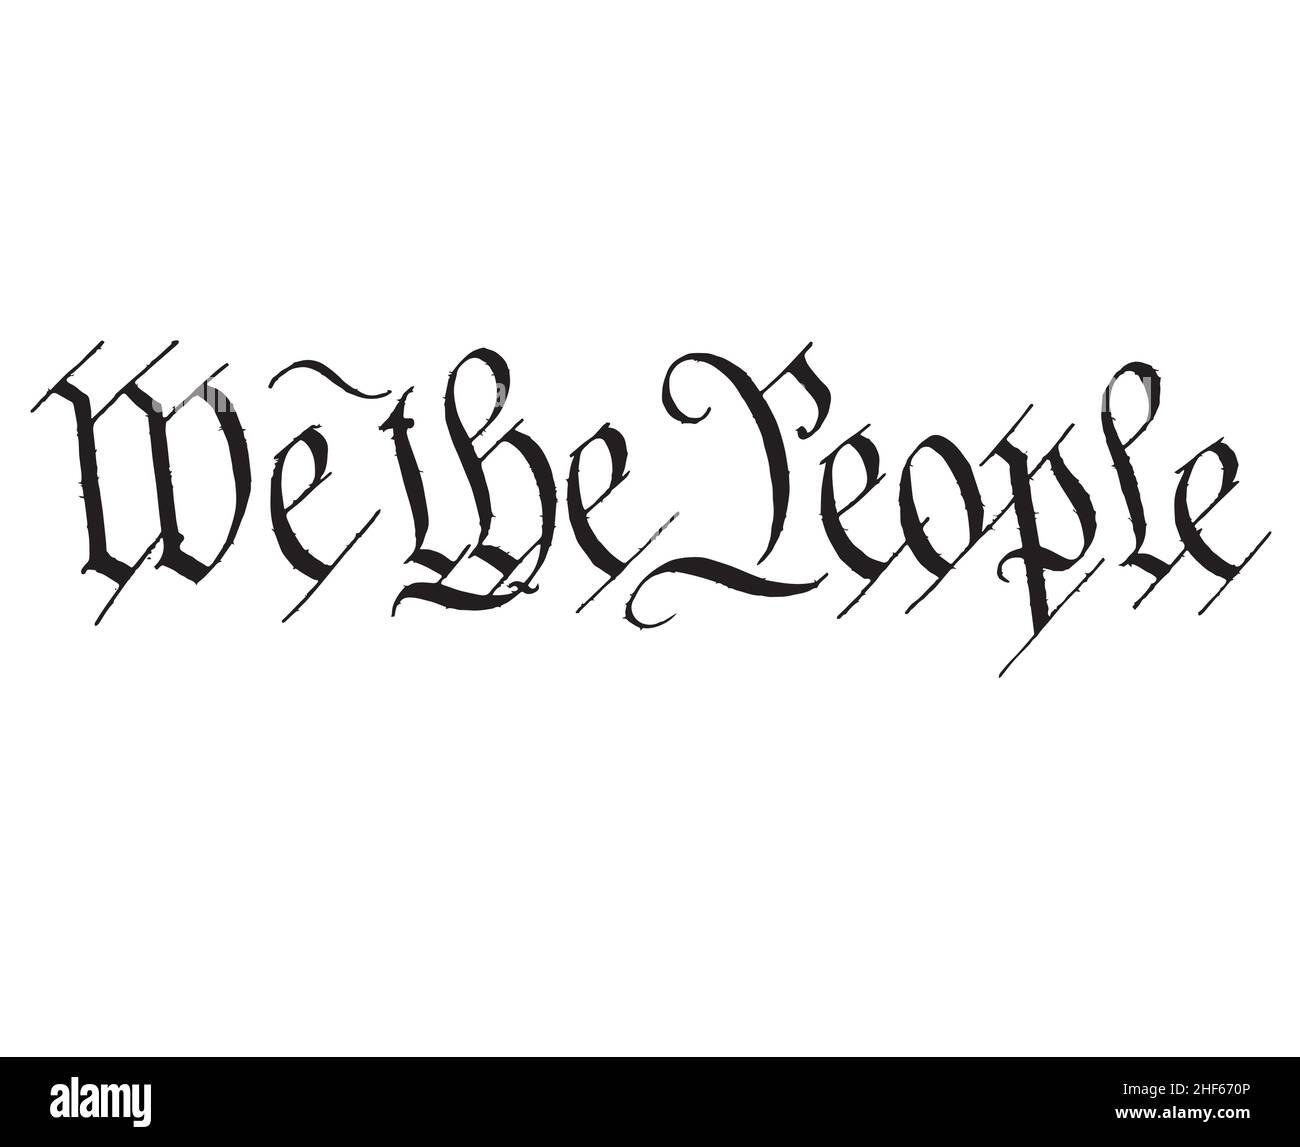 We the People text from the usa constitution vector black isolated on white background Stock Vector